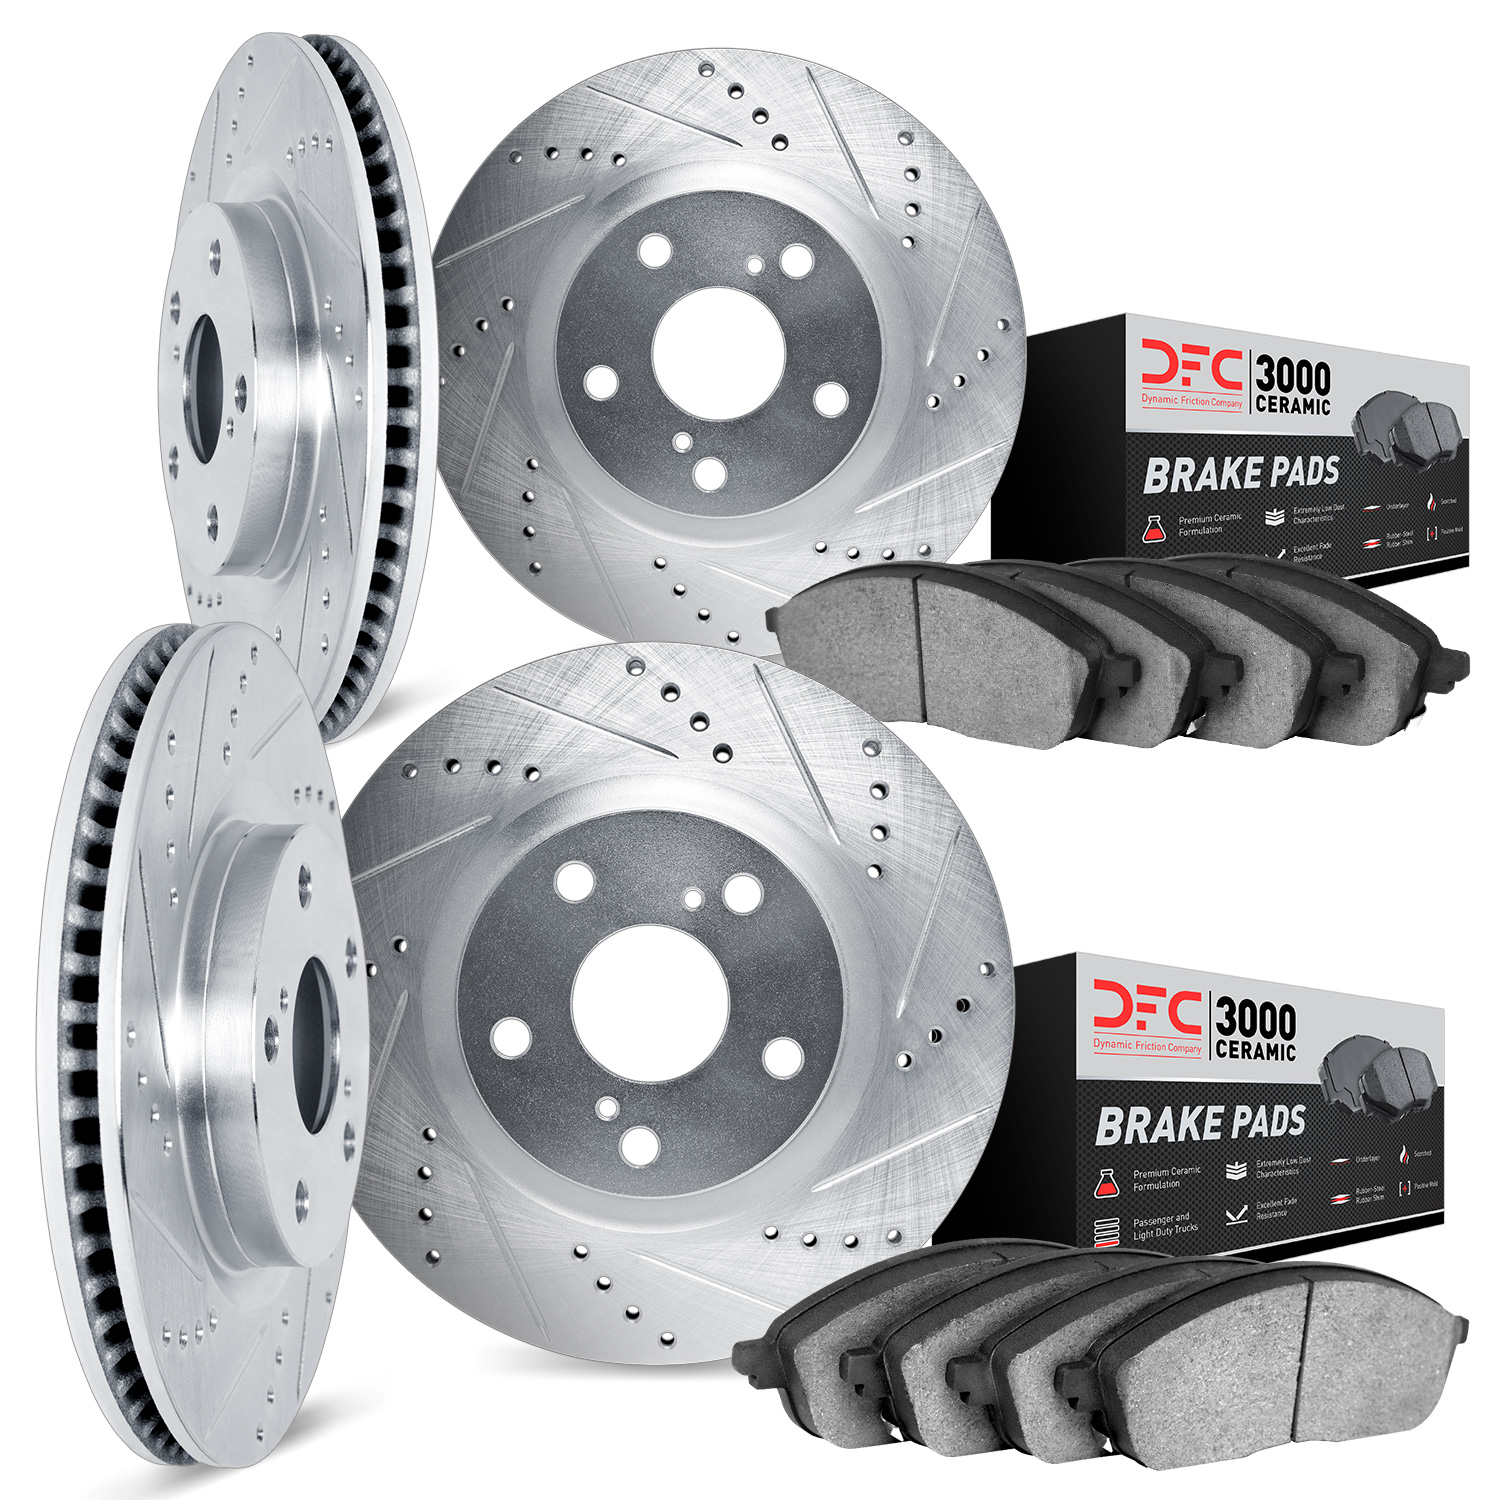 7304-76032 Drilled/Slotted Brake Rotor with 3000-Series Ceramic Brake Pads Kit [Silver], 1991-1997 Lexus/Toyota/Scion, Position: